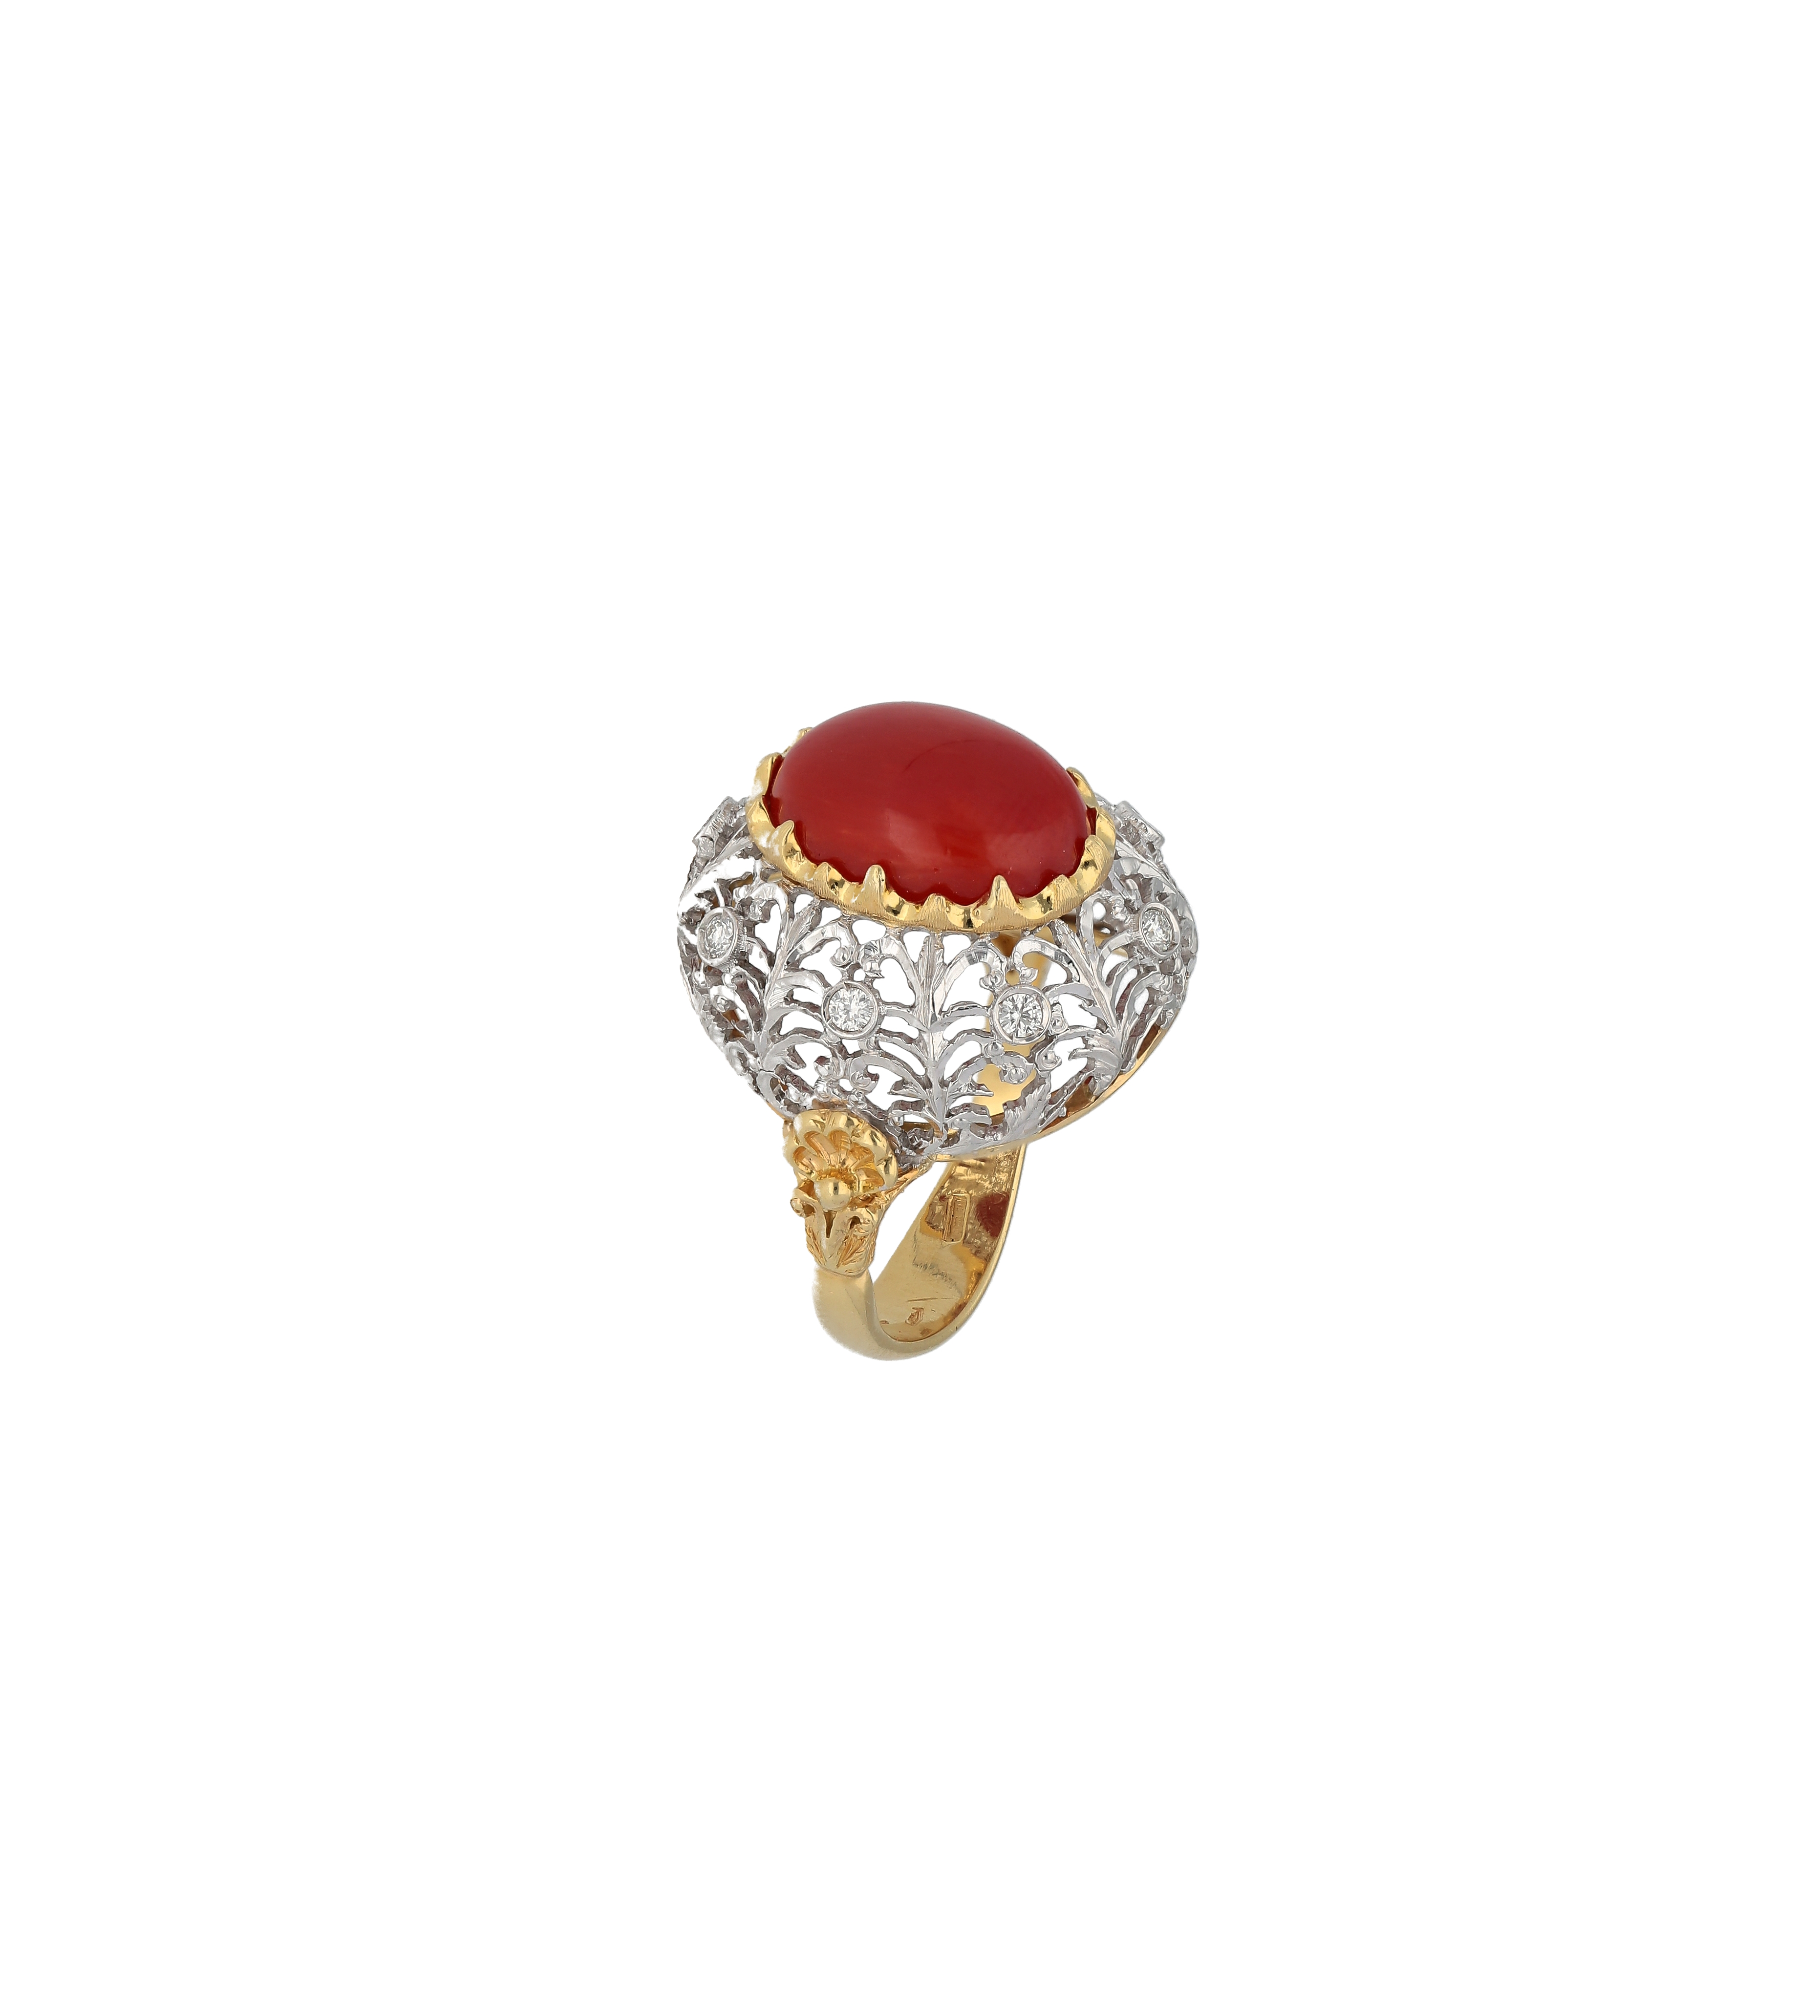 Florentine Cabochon Coral and diamond ring